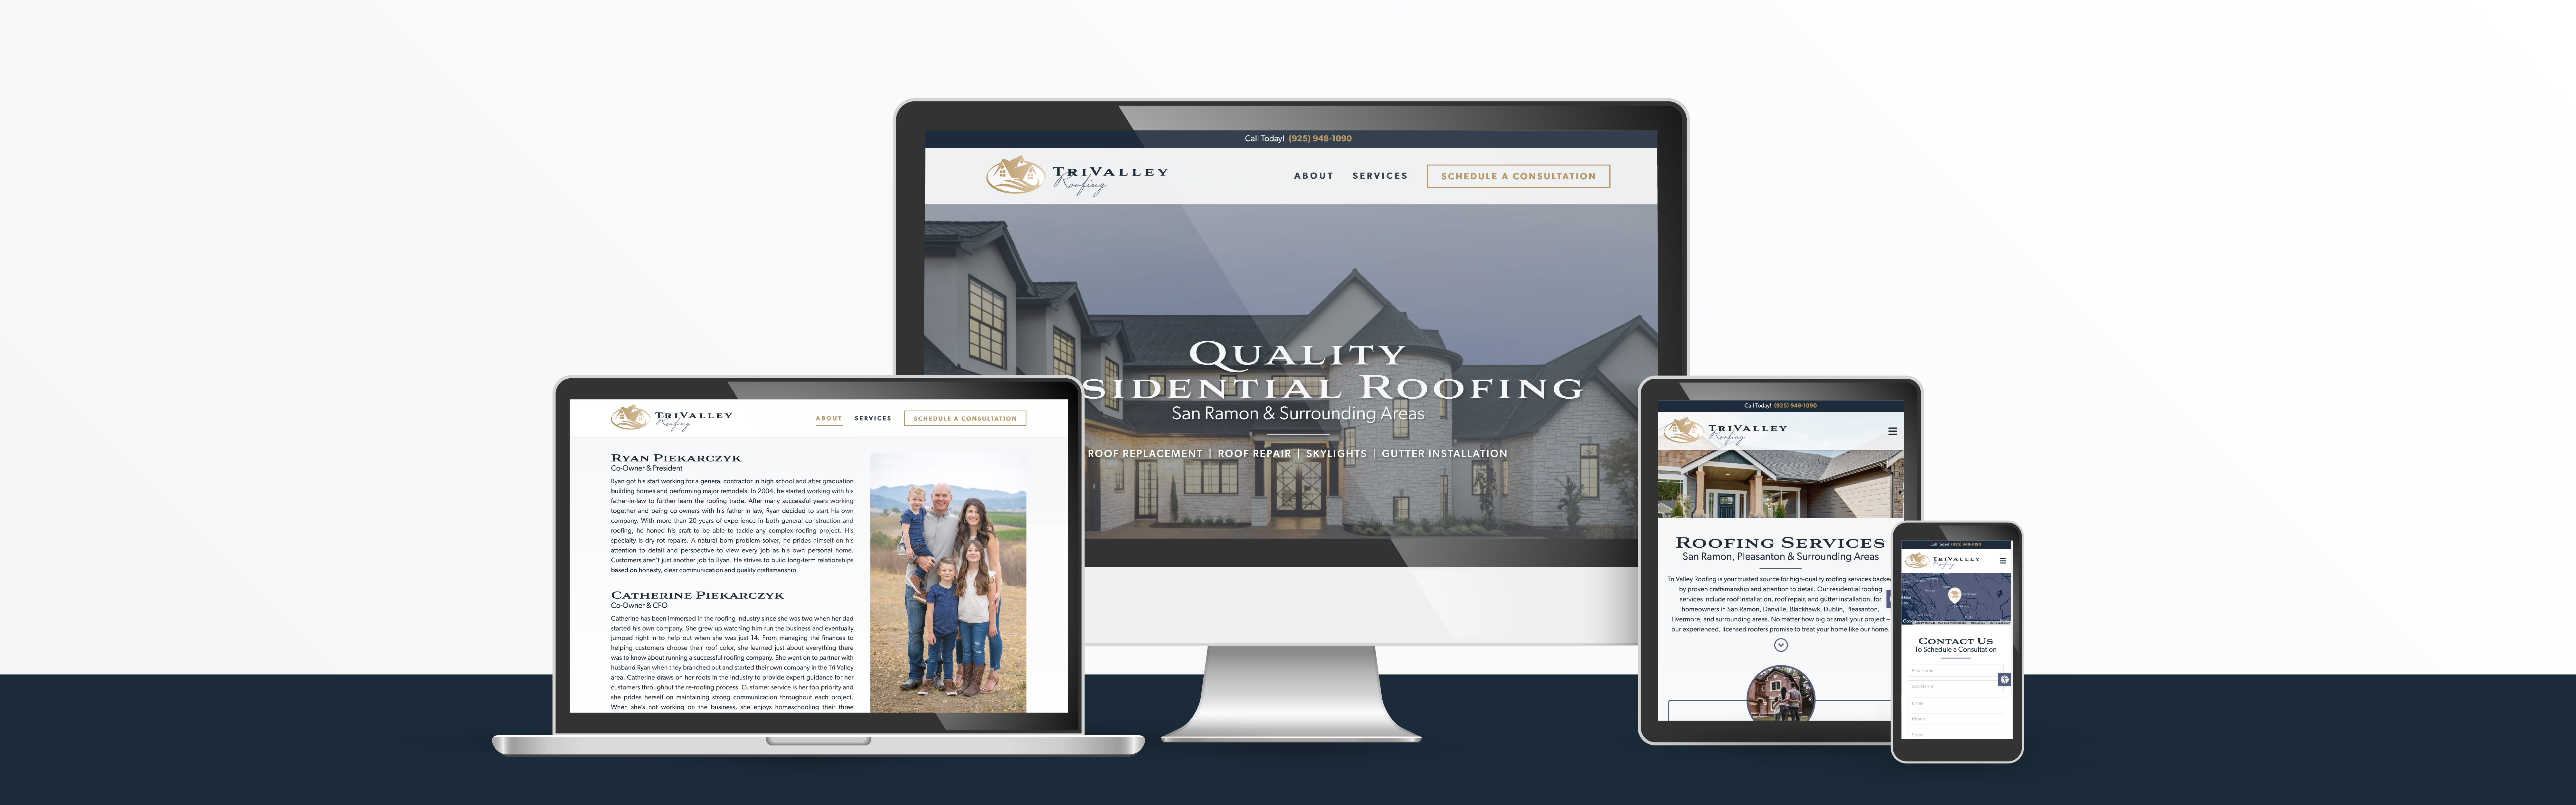 Tri Valley Roofing web design